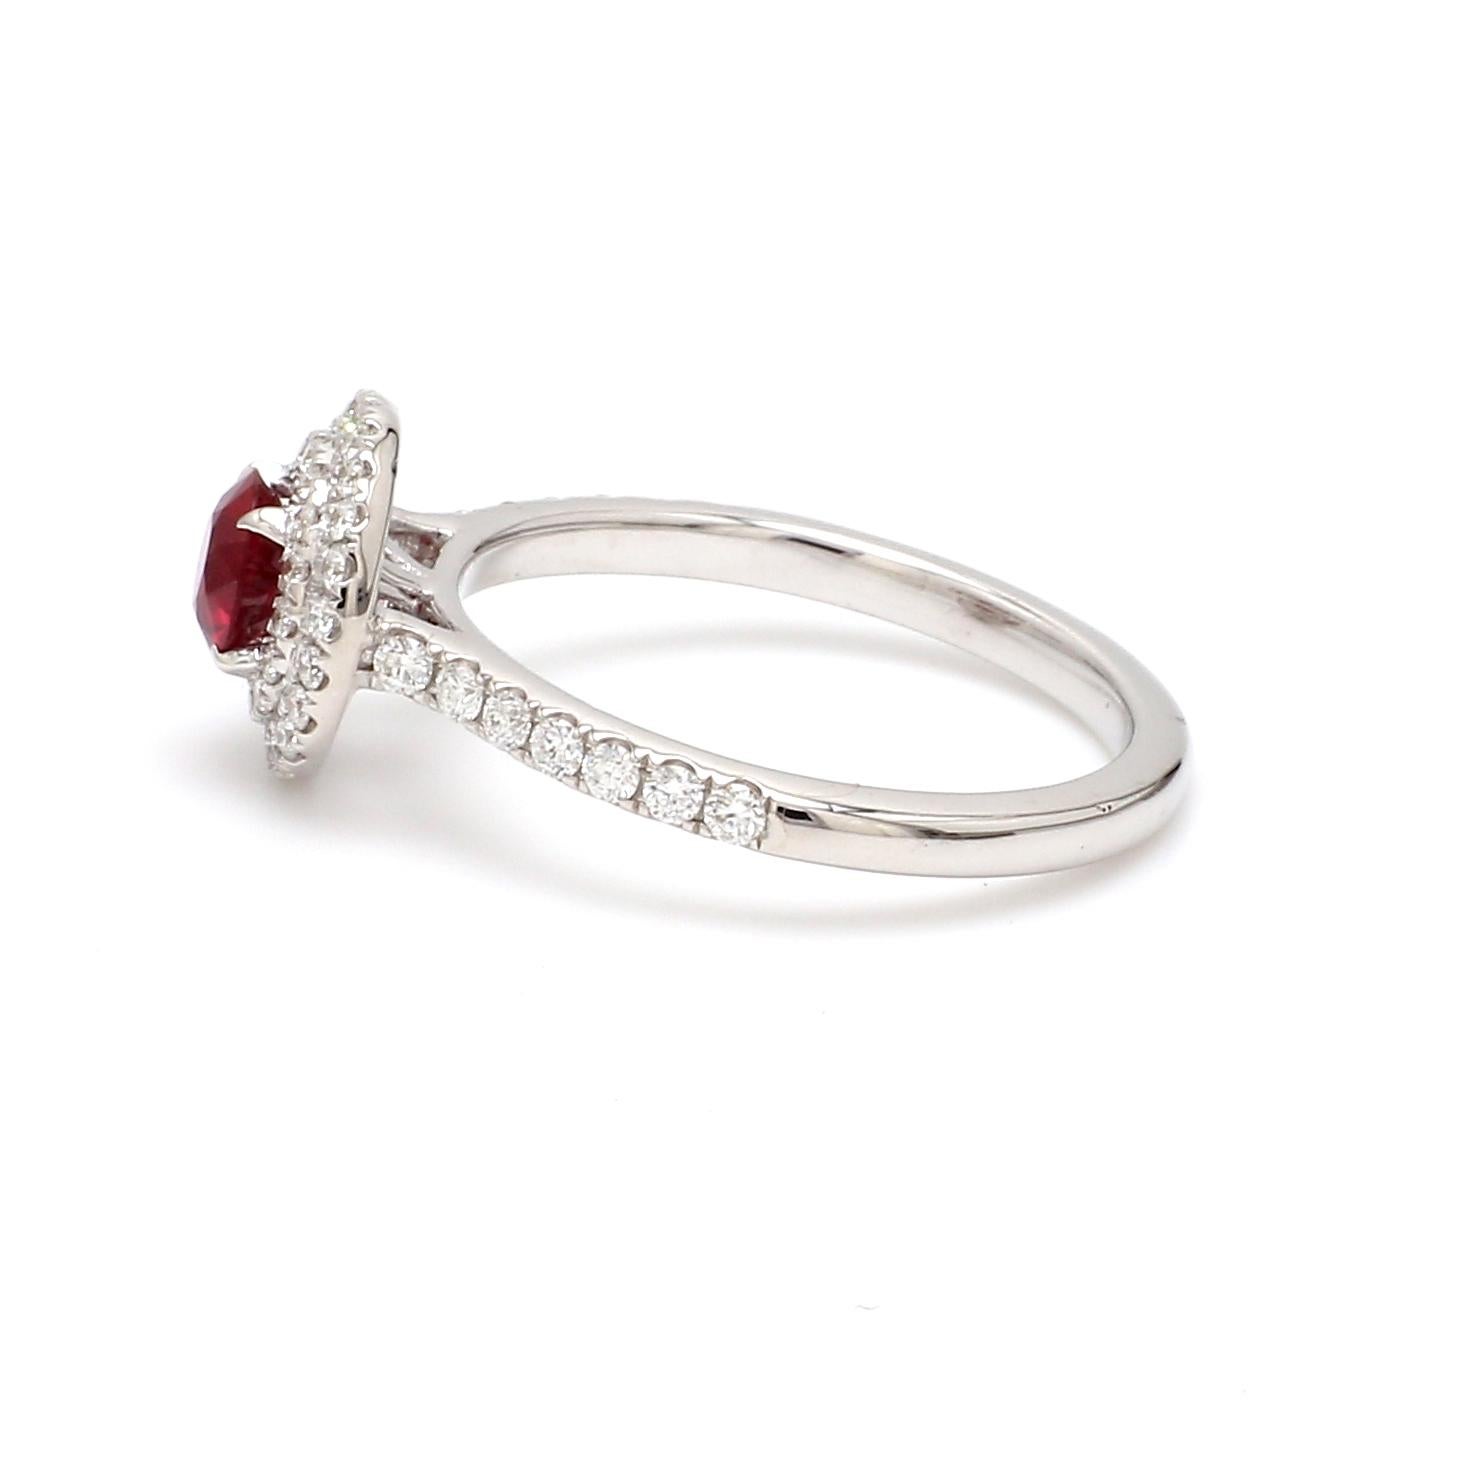 A Beautiful Handcrafted Ring in 18 Karat White Gold  with Natural No Heat Ruby of Mozambique origin- Gem Field Mined and Brilliant Cut Diamonds Halo Ring.

Ruby Details
Weight: 0.54 carats
Exceptional Clean stone cut in Diamond Facets with very nice